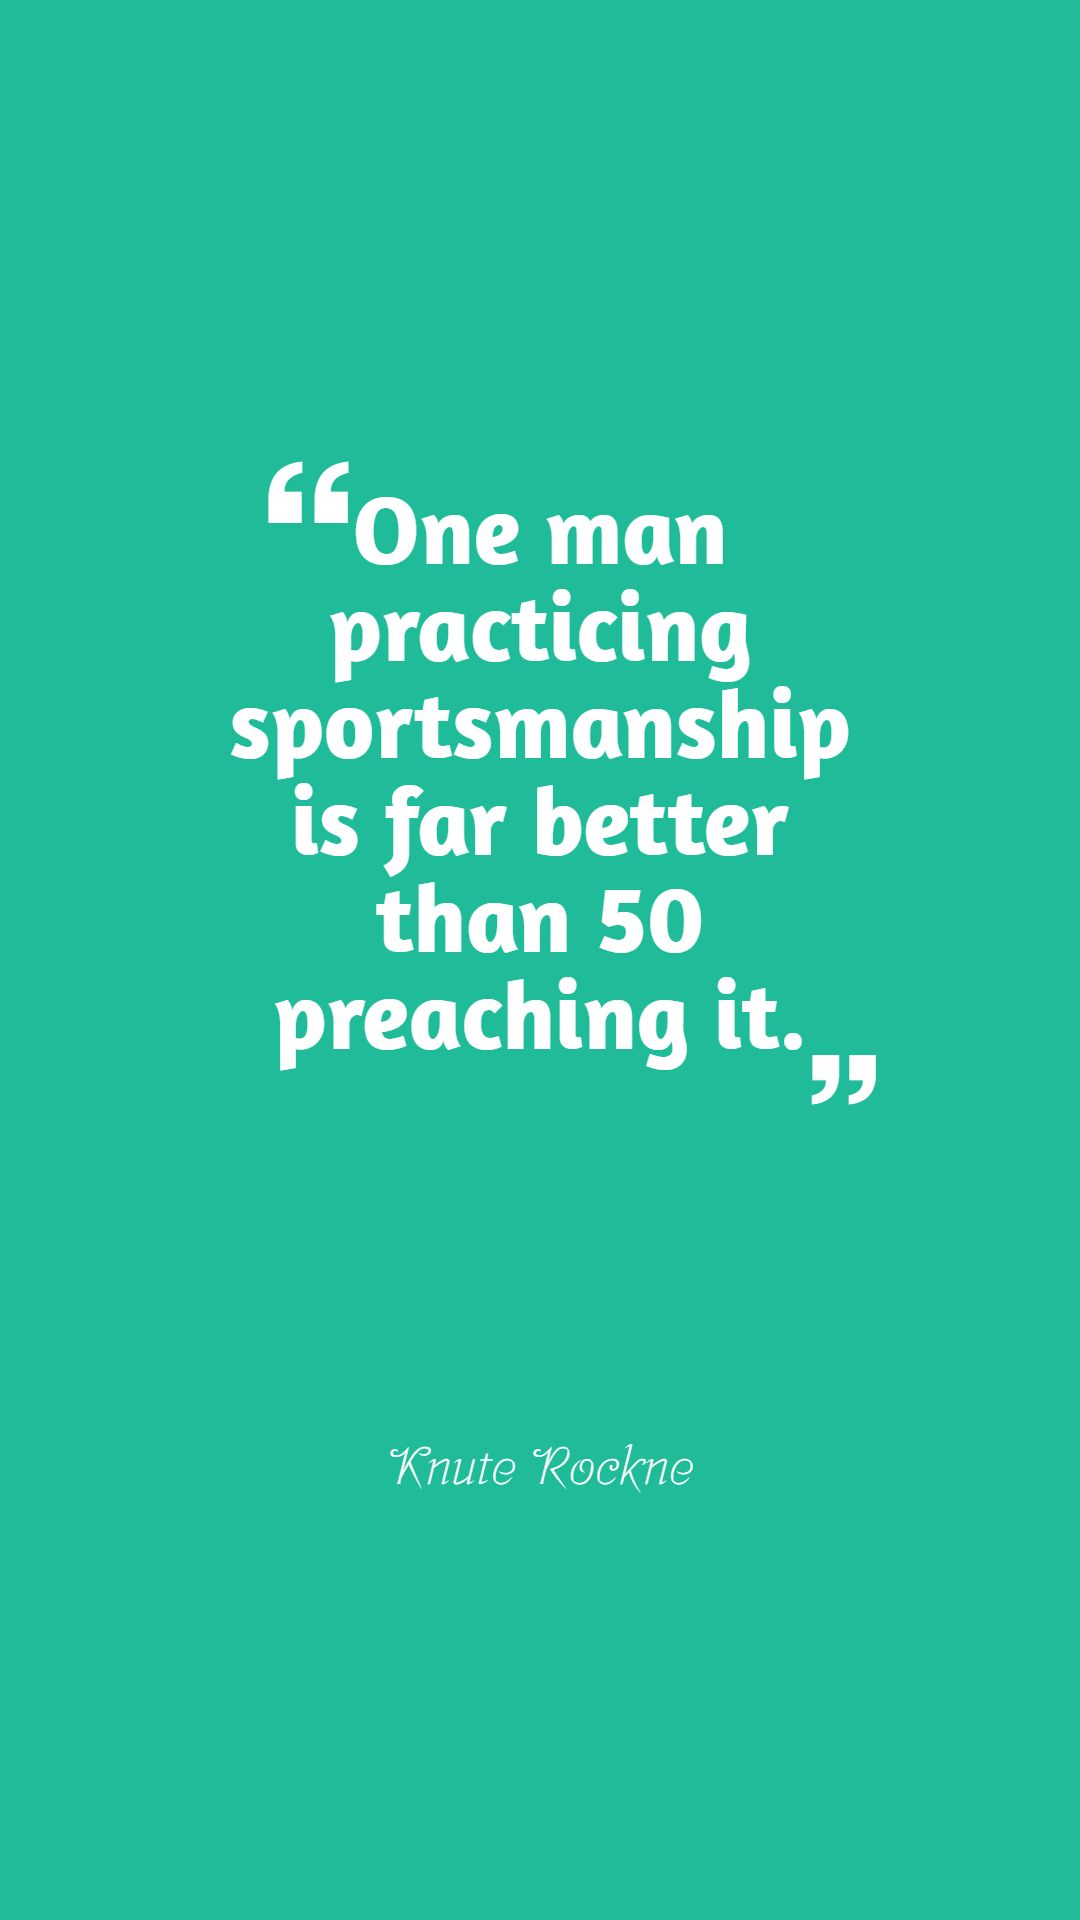 One man practicing sportsmanship is far better than 50 preaching it.